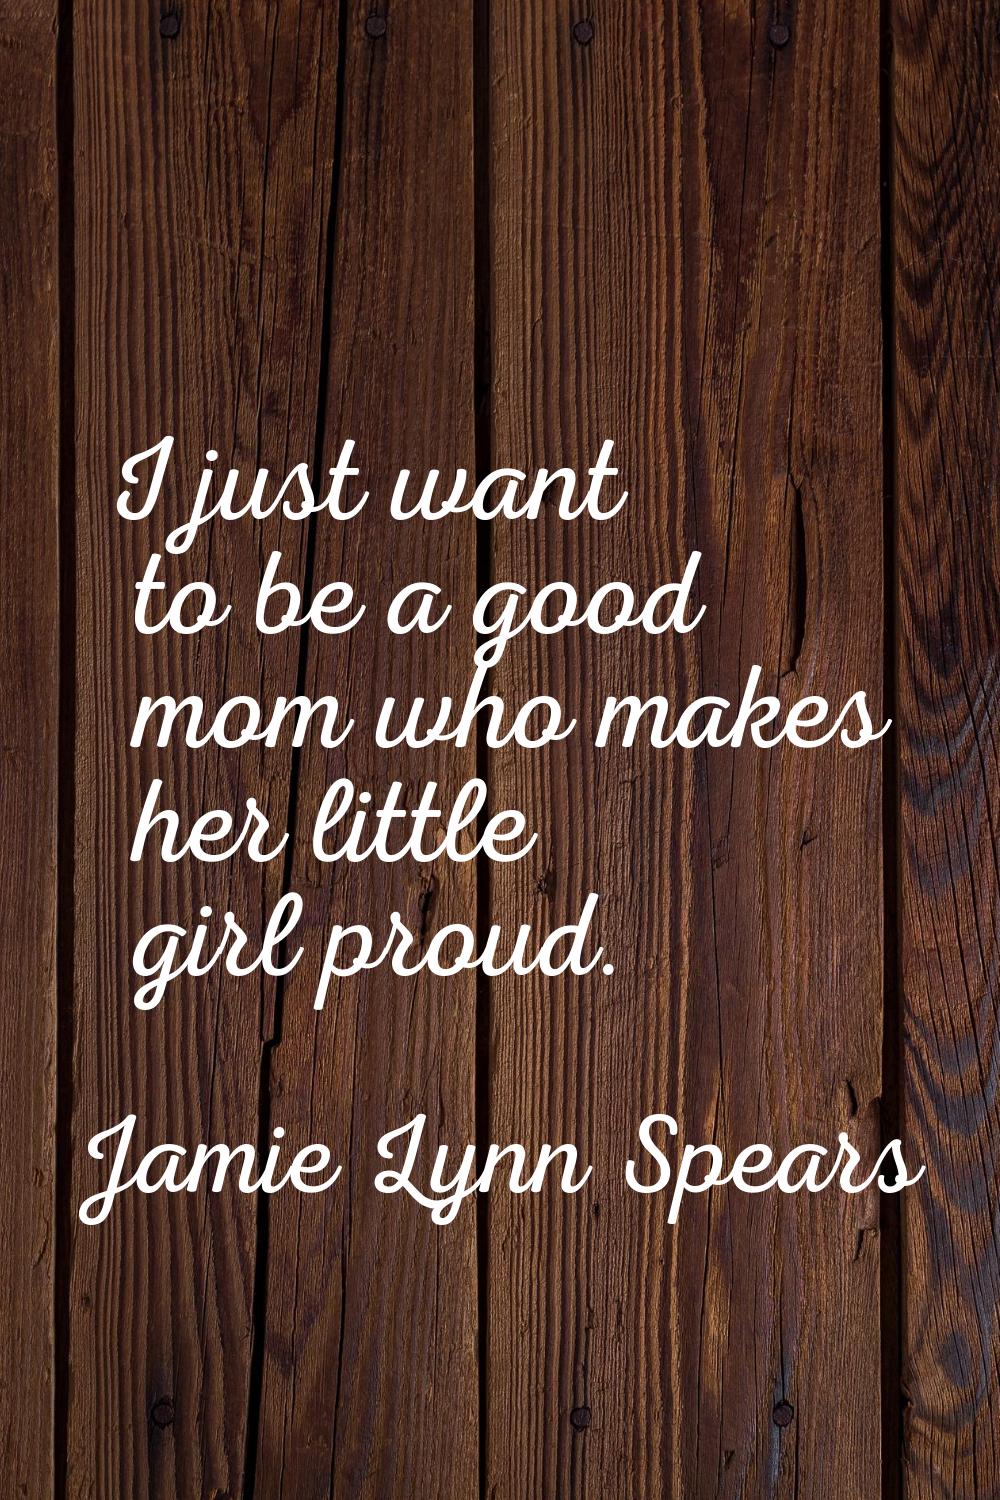 I just want to be a good mom who makes her little girl proud.